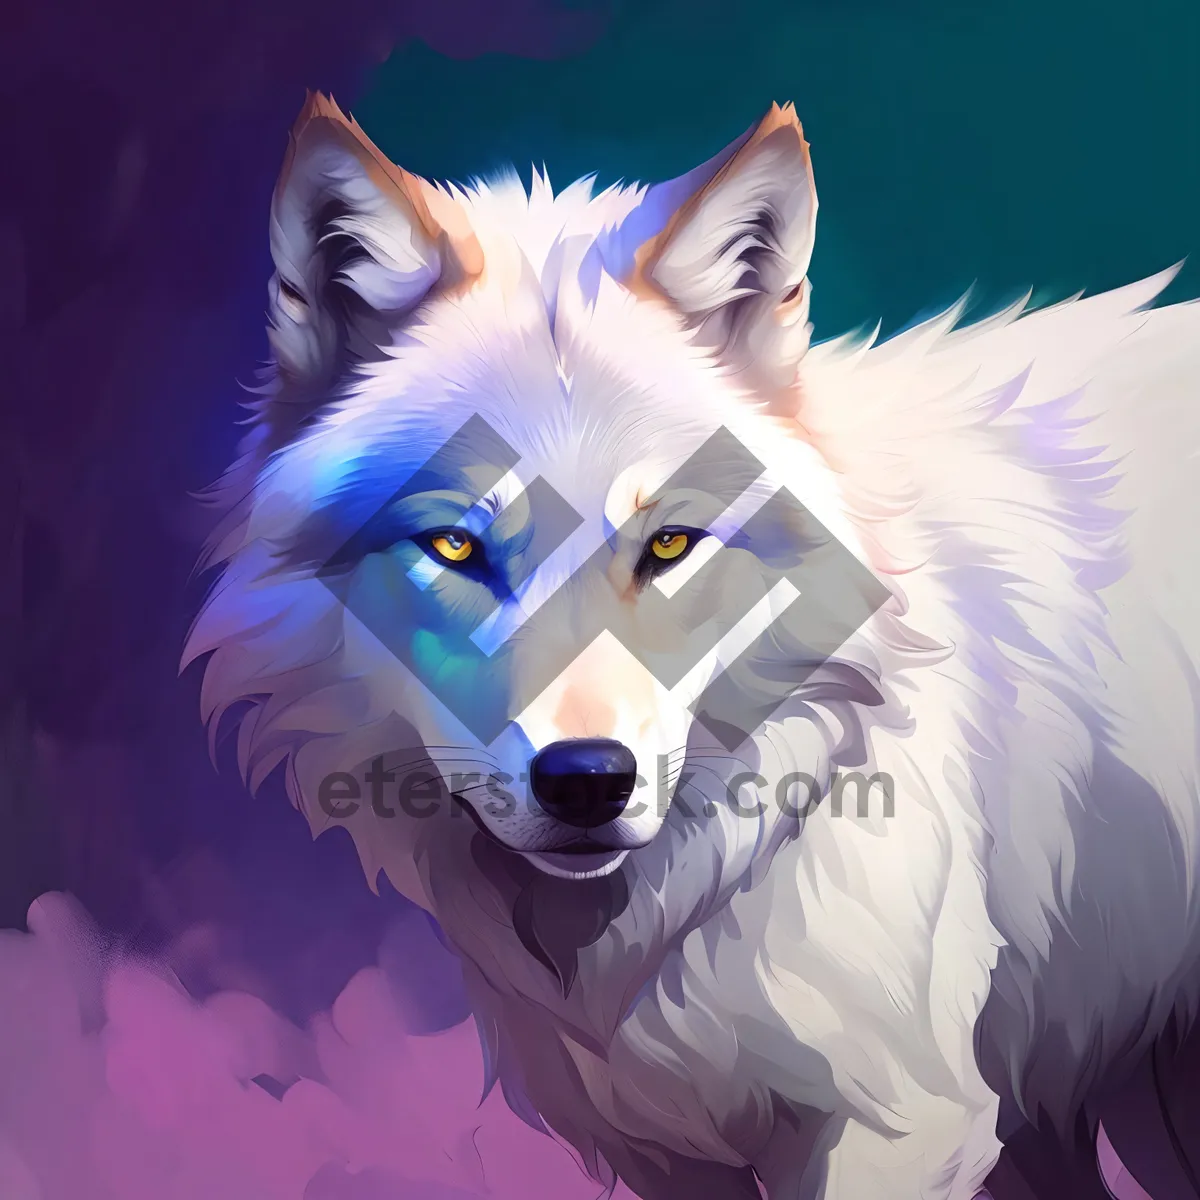 Picture of Adorable Canine Portrait with White Wolf-like Fur